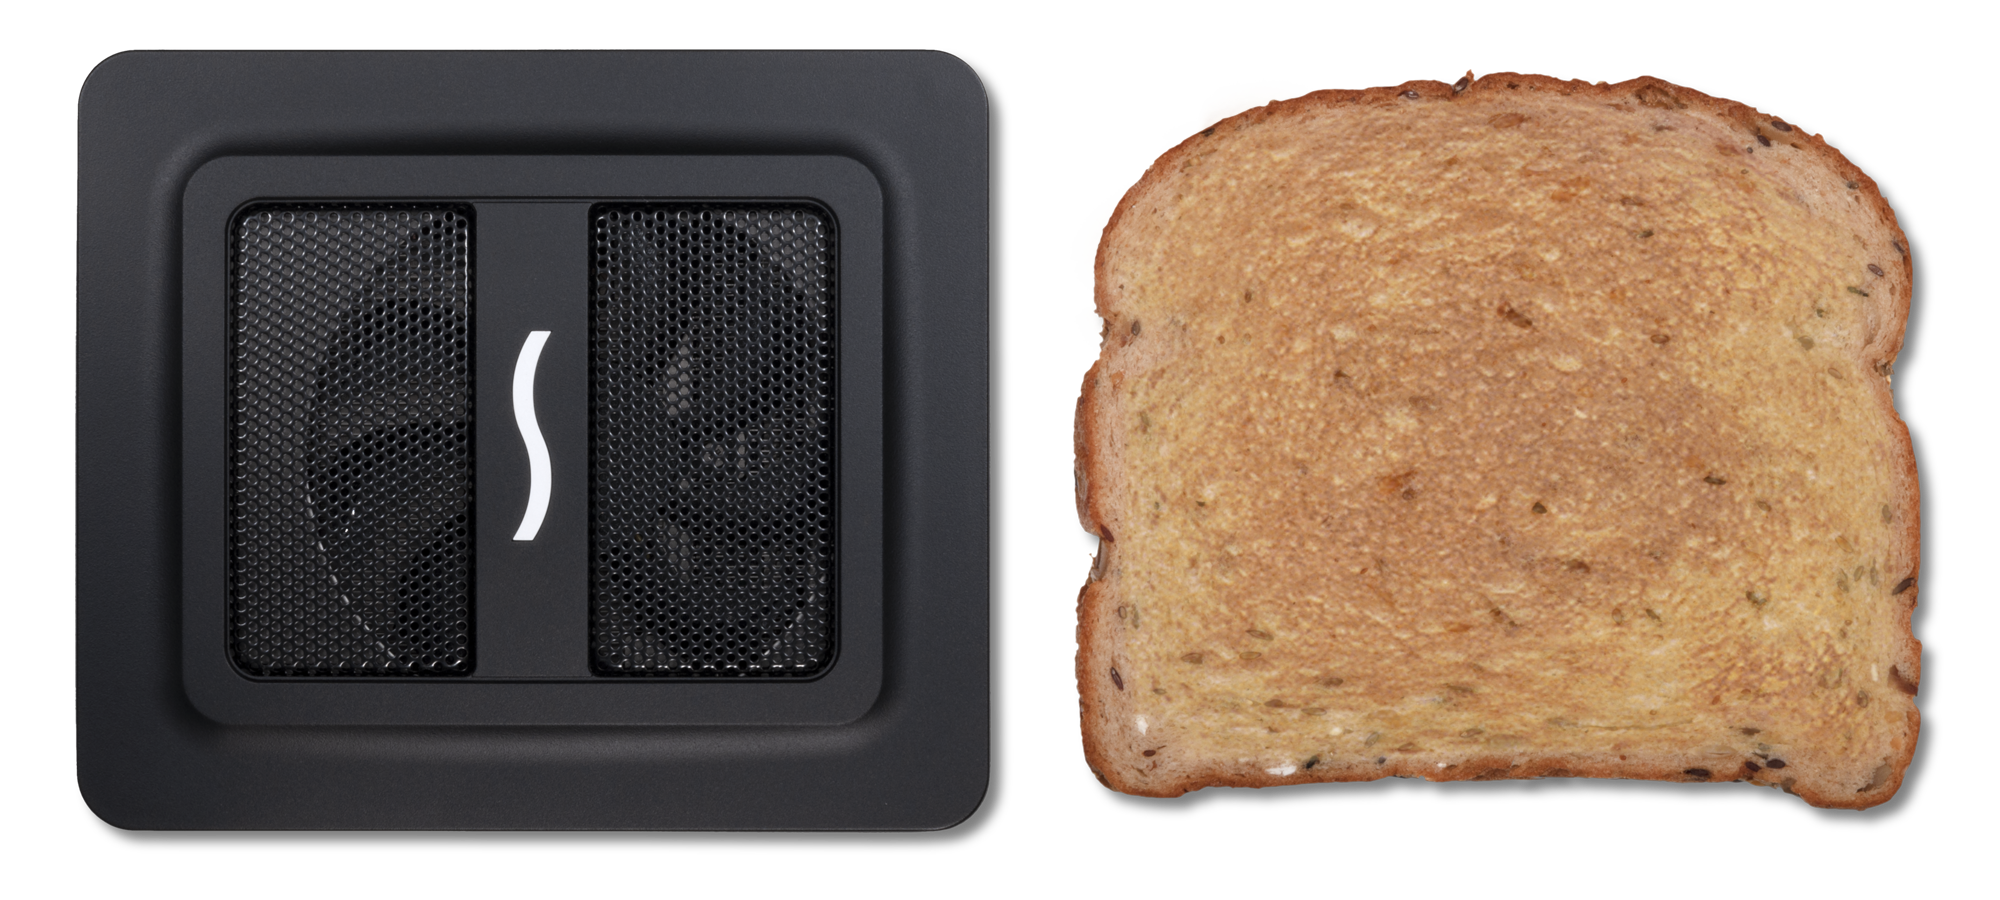 eGPU Breakaway Puck Dimensions Compared to Piece of Toast